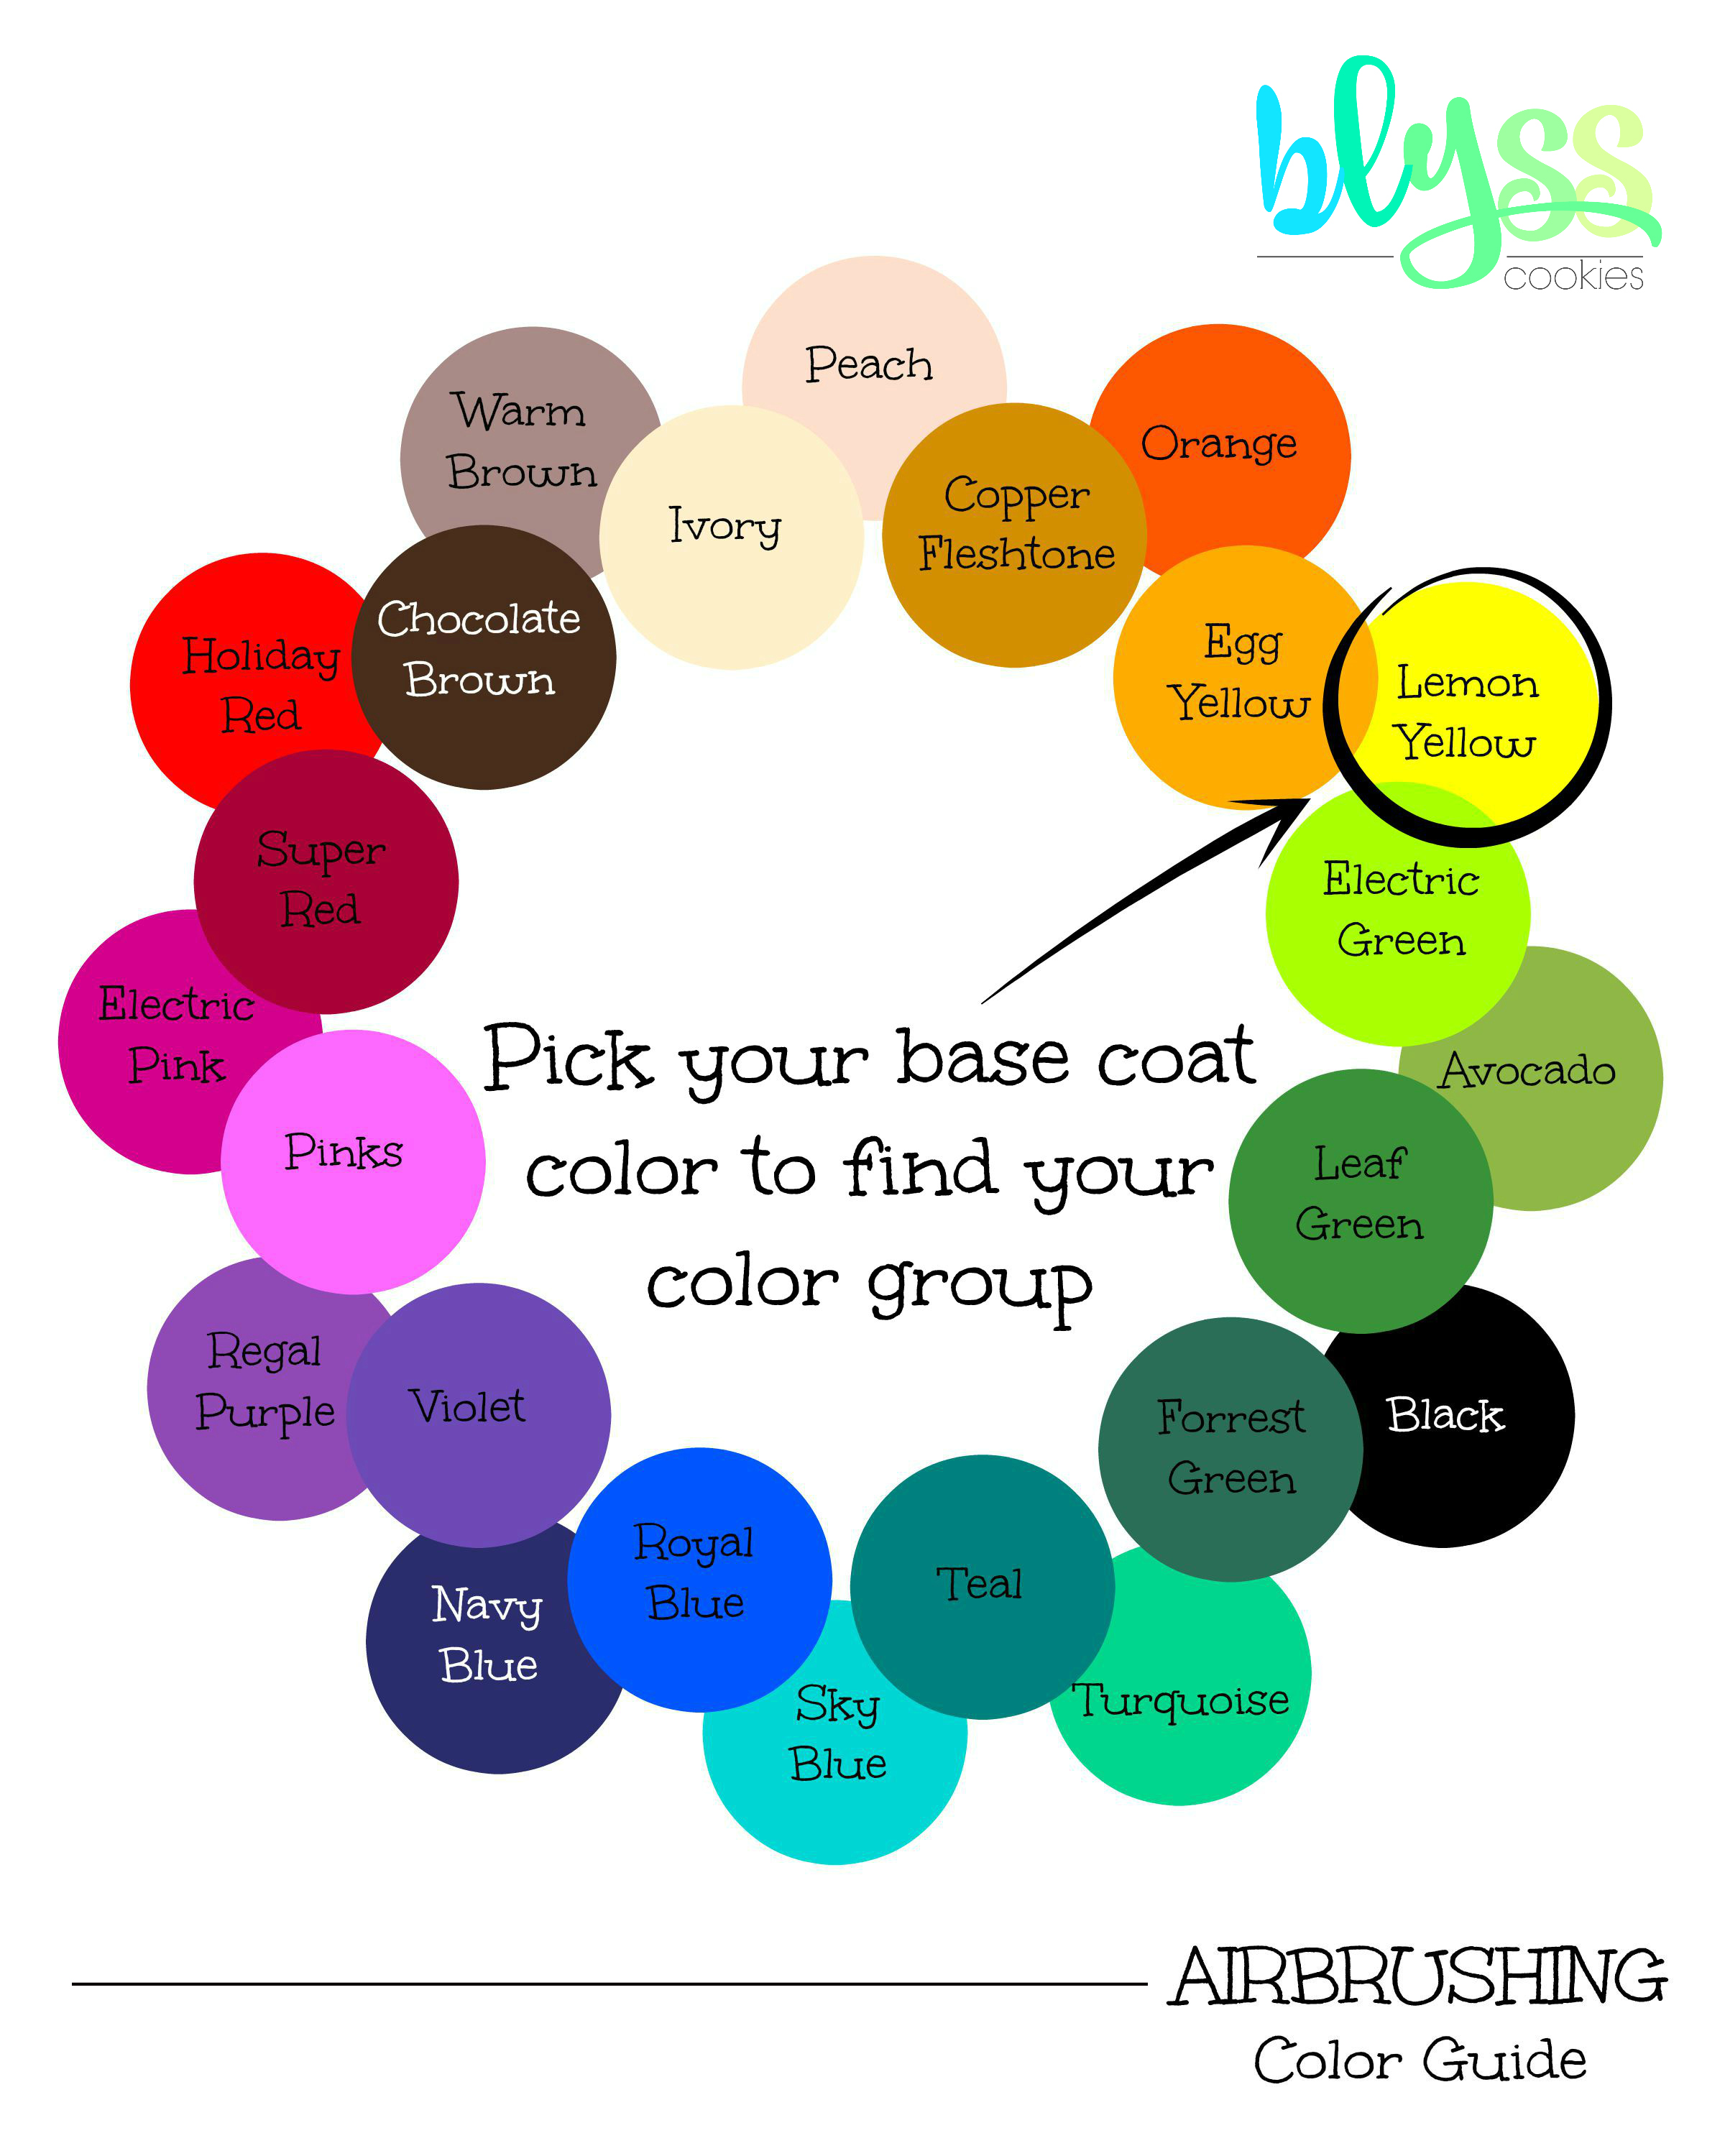 Airbrushing Color Guide2.jpg